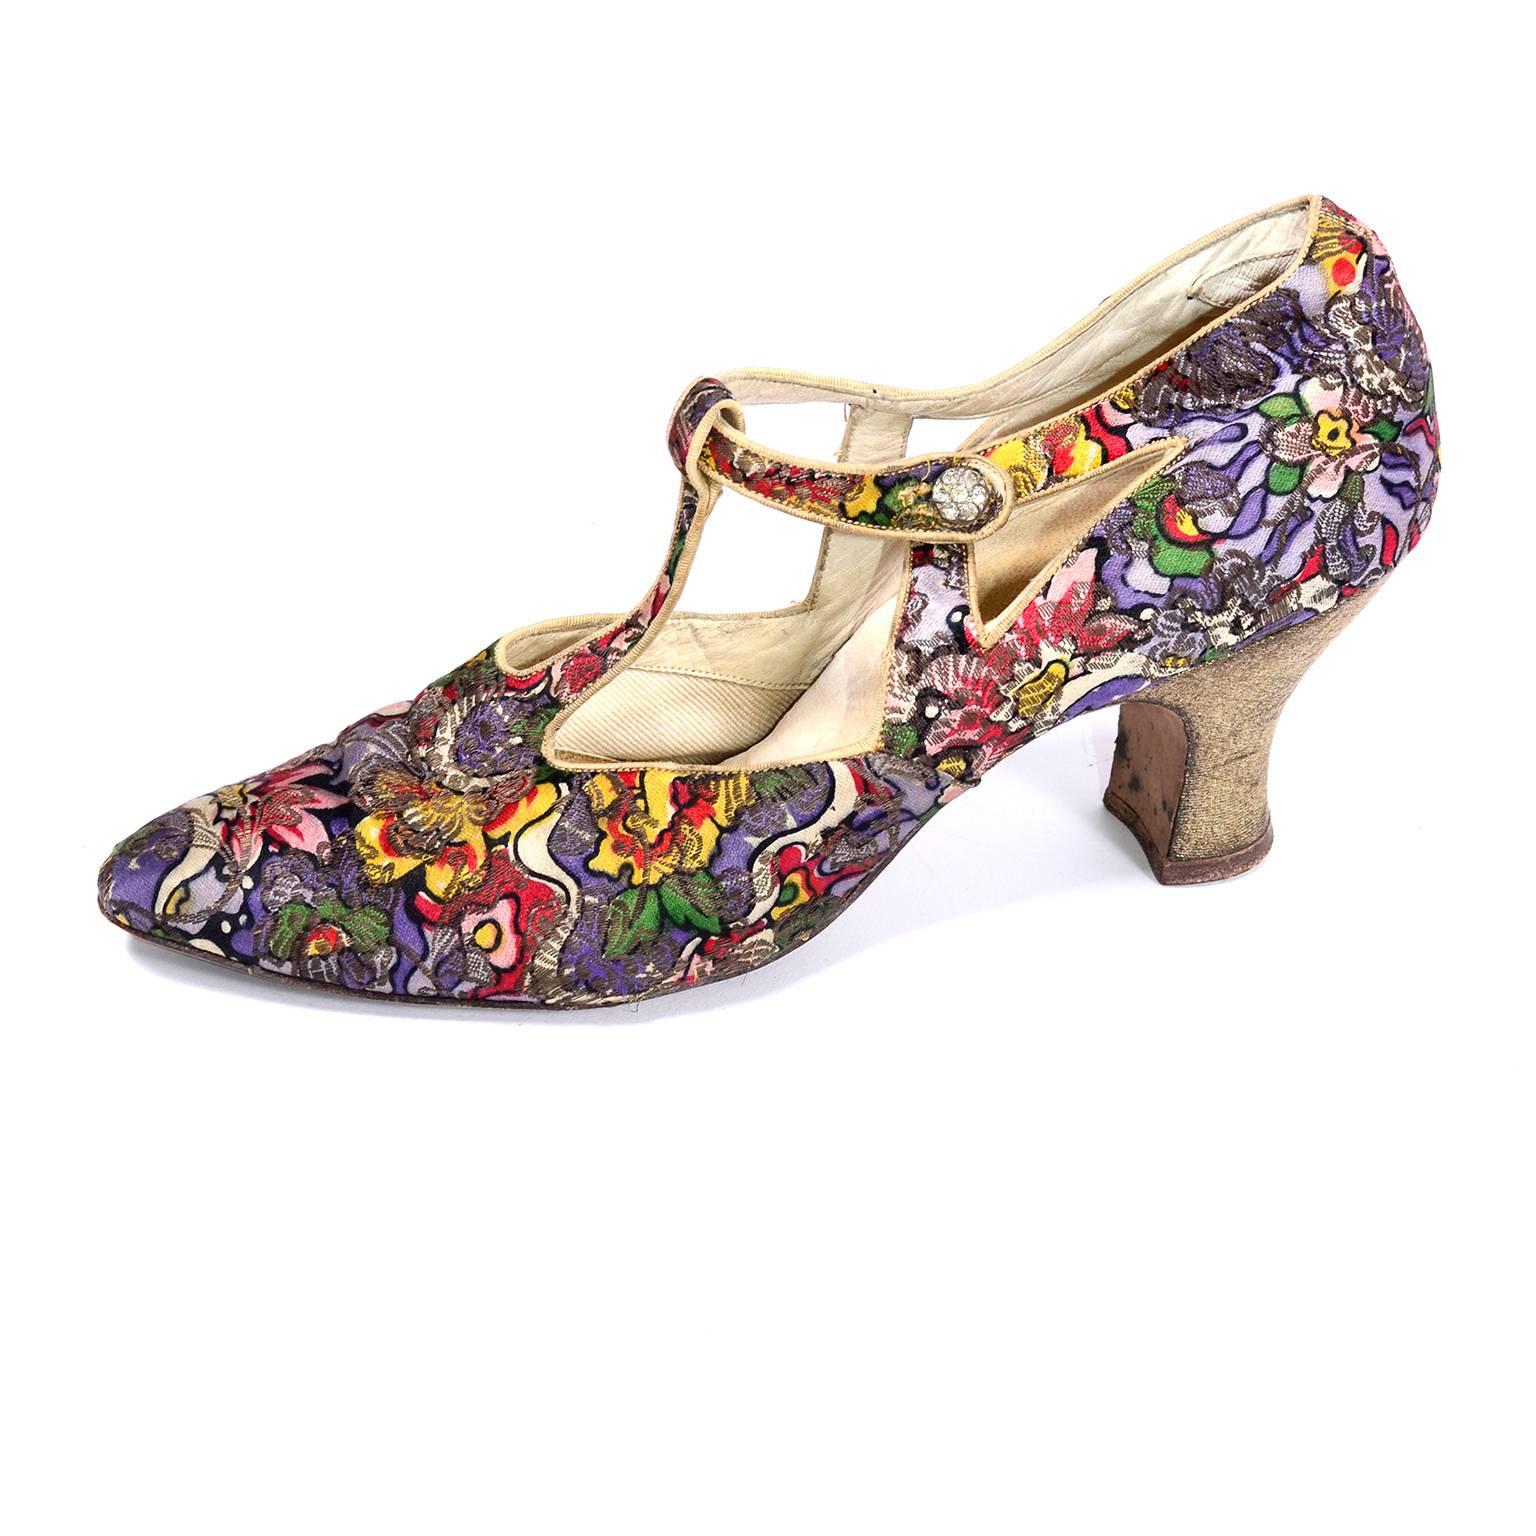 These vintage shoes came from the estate of a Chicago socialite who owned the Harry Collins dress we have on 1stdibs. Everything she owned was truly sensational and this pair of T strap heels is no exception. The shoes are in a multi floral brocade